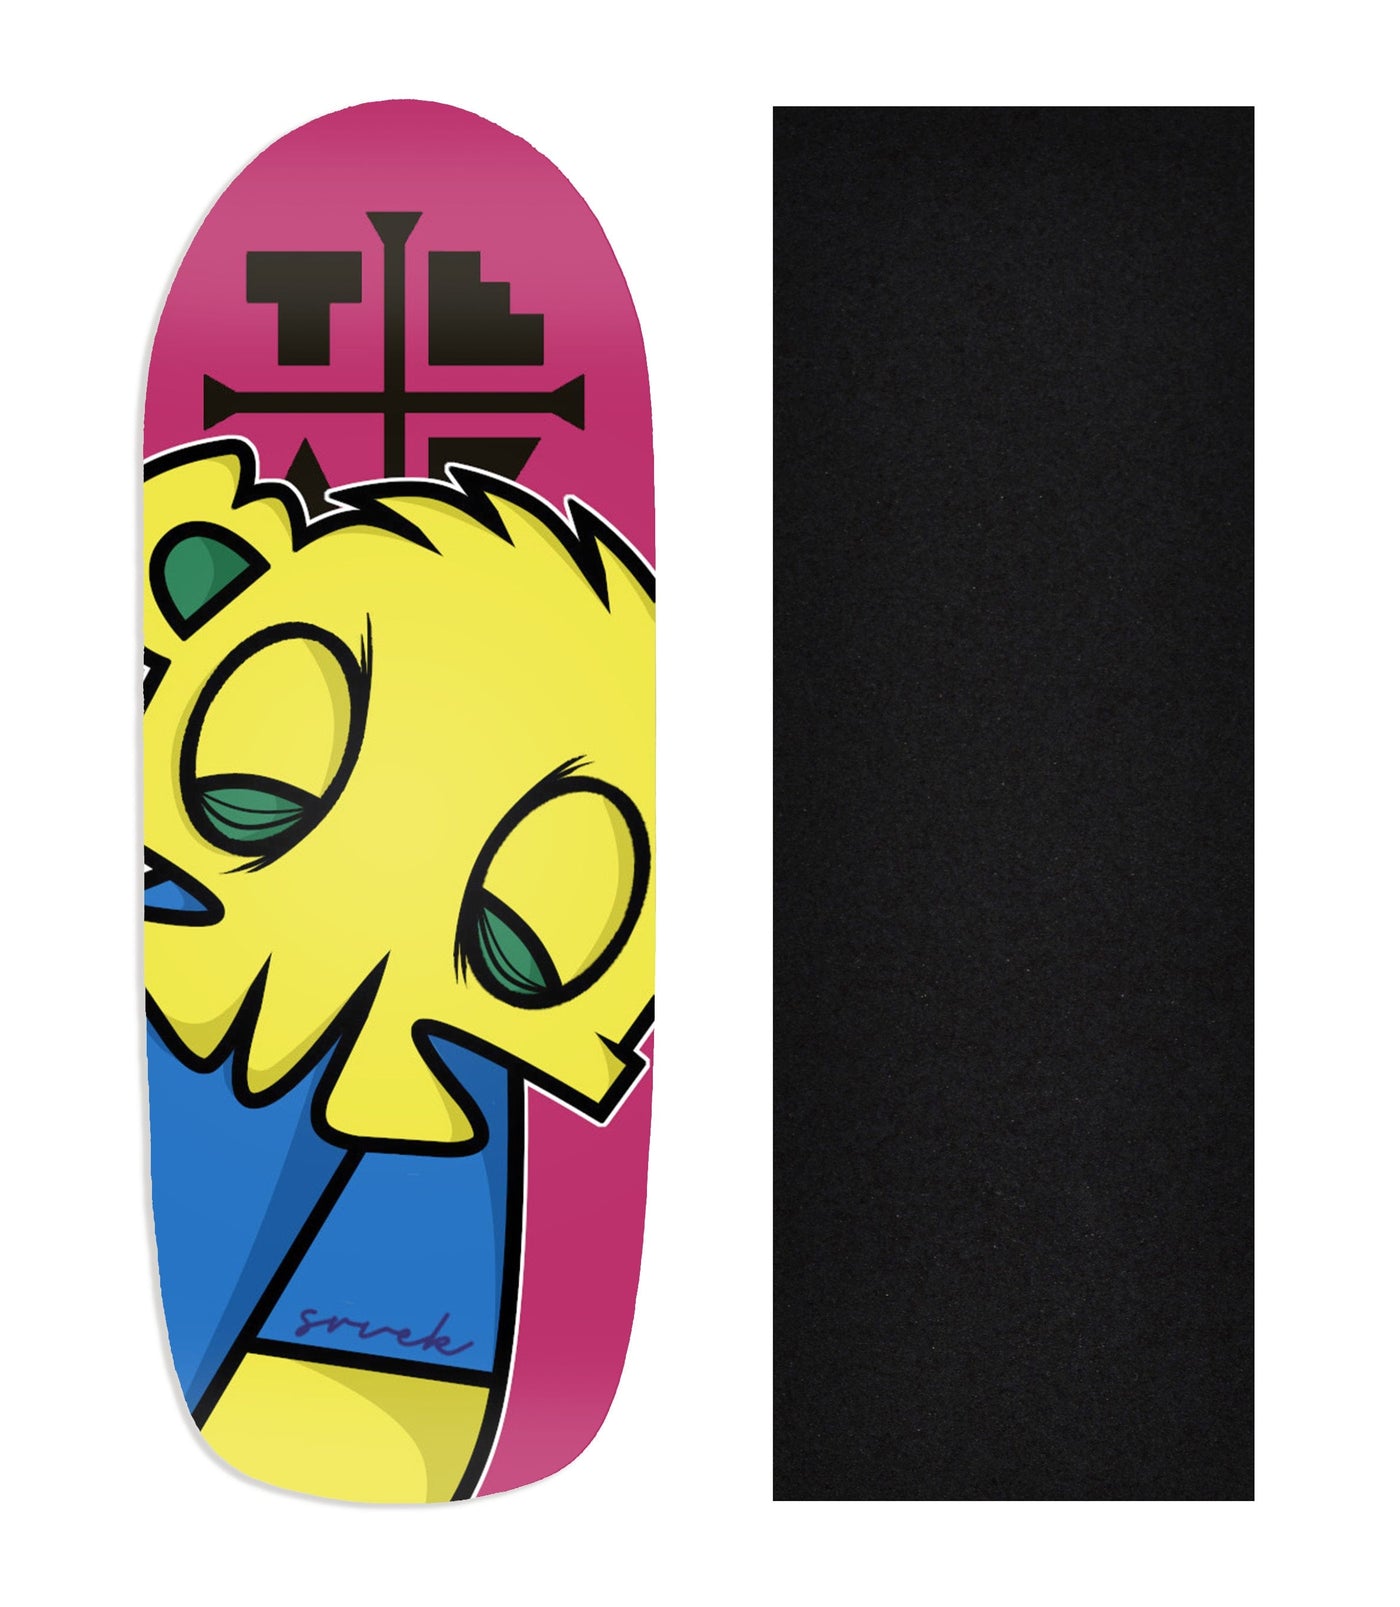 Teak Tuning Heat Transfer Graphic Wooden Fingerboard Deck, @prodbyswtchflp - Entry #112 Poolparty Deck